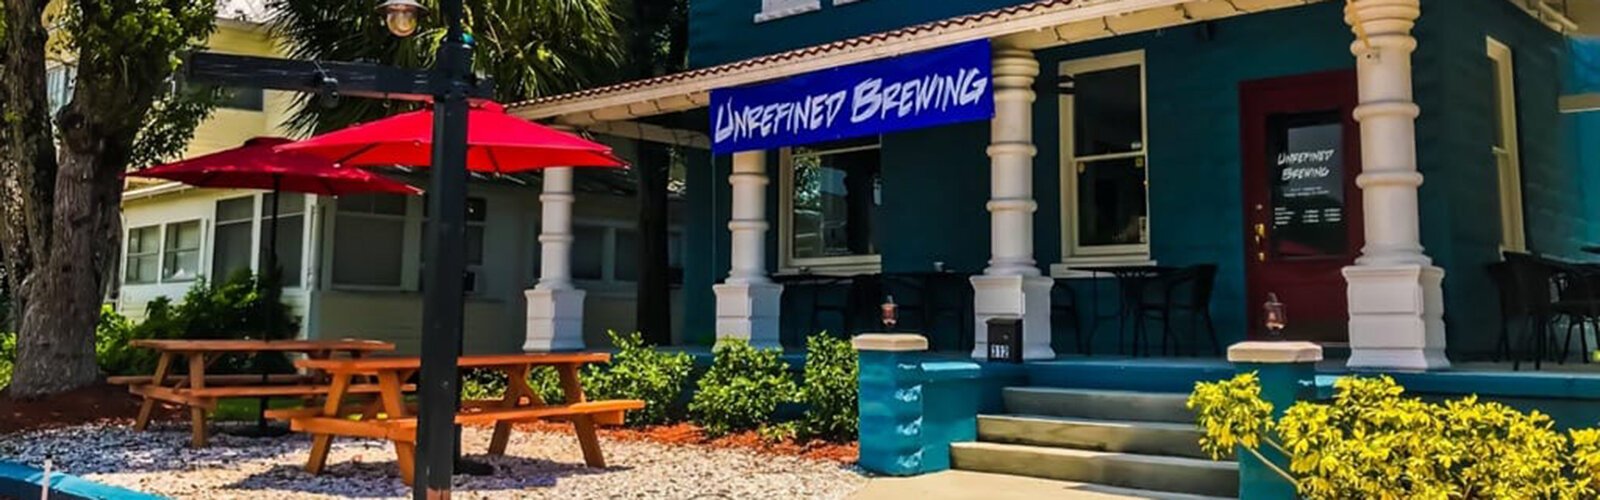 Unrefined Brewing is the latest addition to Tarpon Springs' craft beer scene.